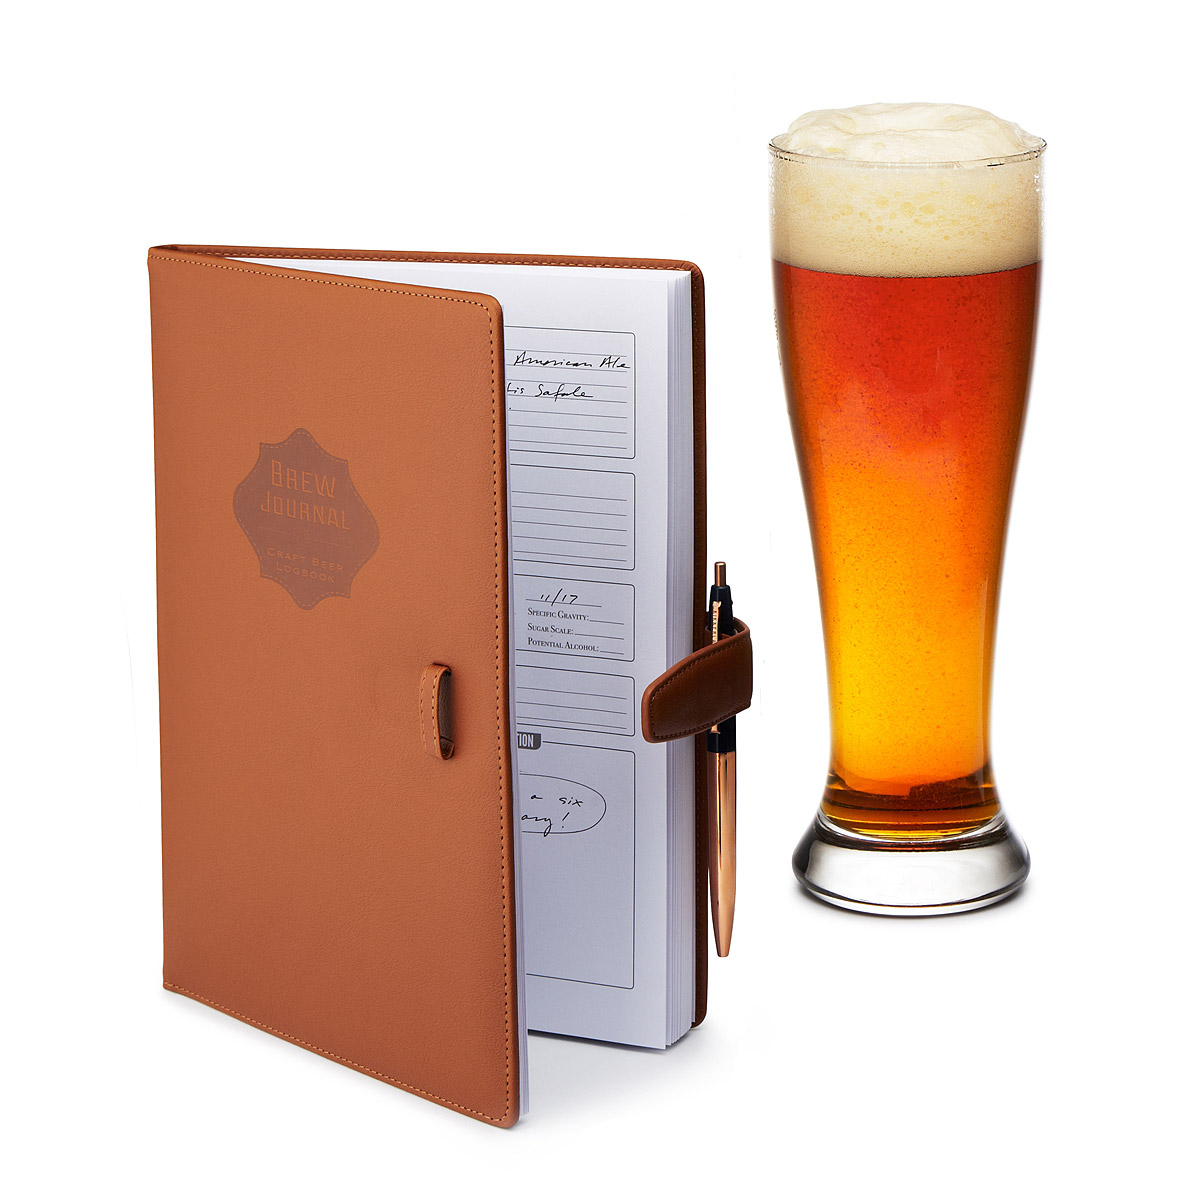 Home Brew Journal | UncommonGoods